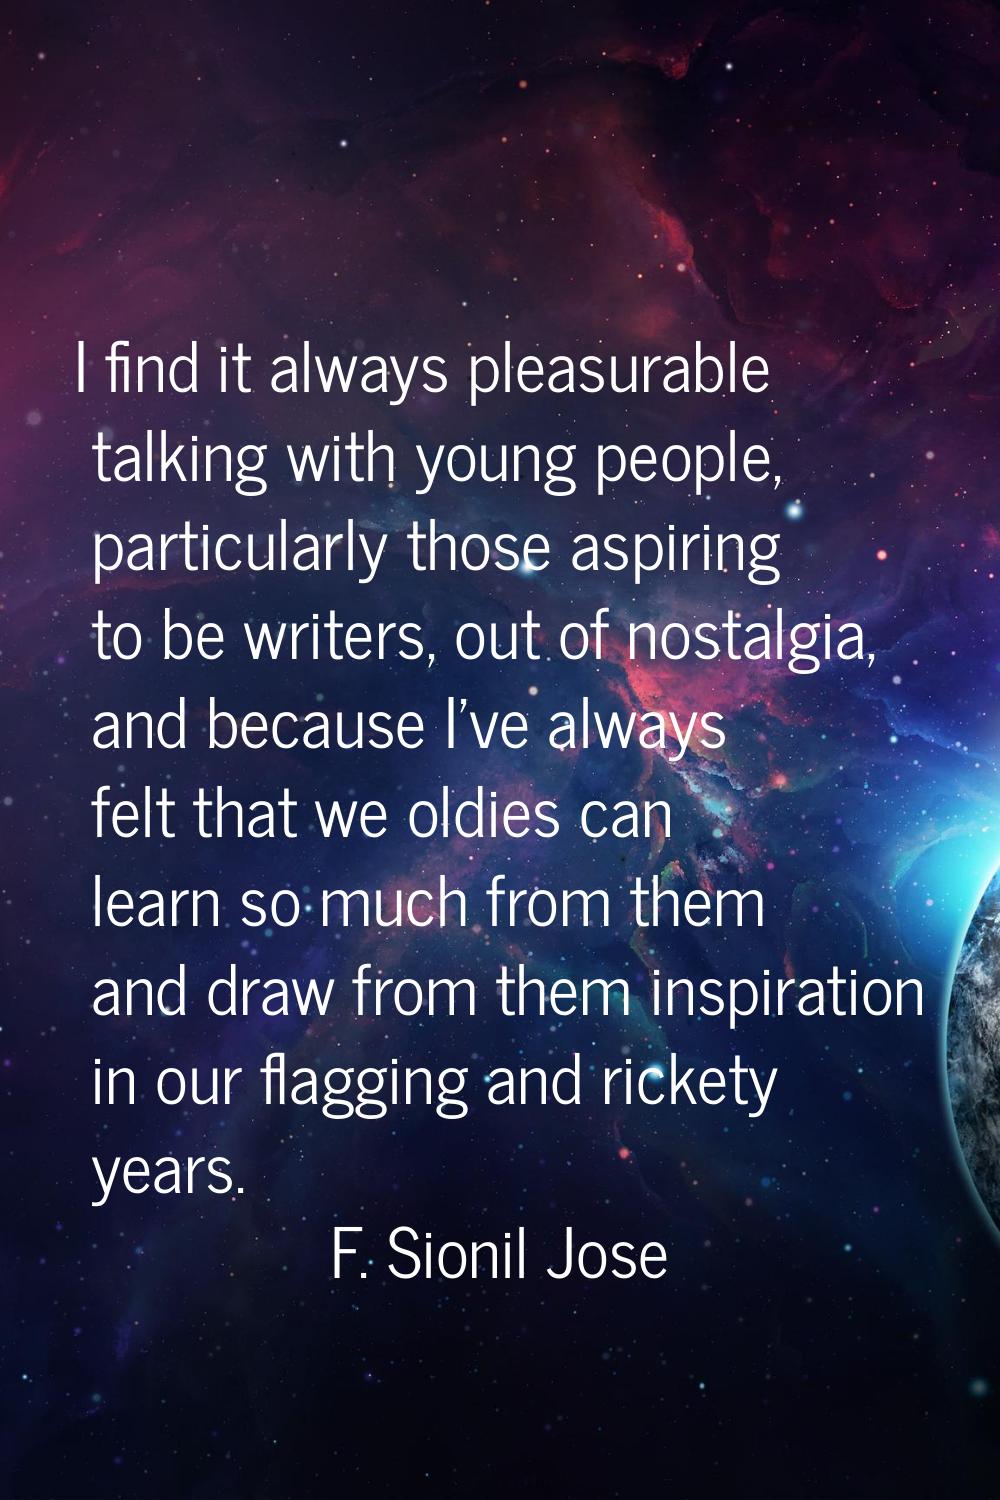 I find it always pleasurable talking with young people, particularly those aspiring to be writers, 